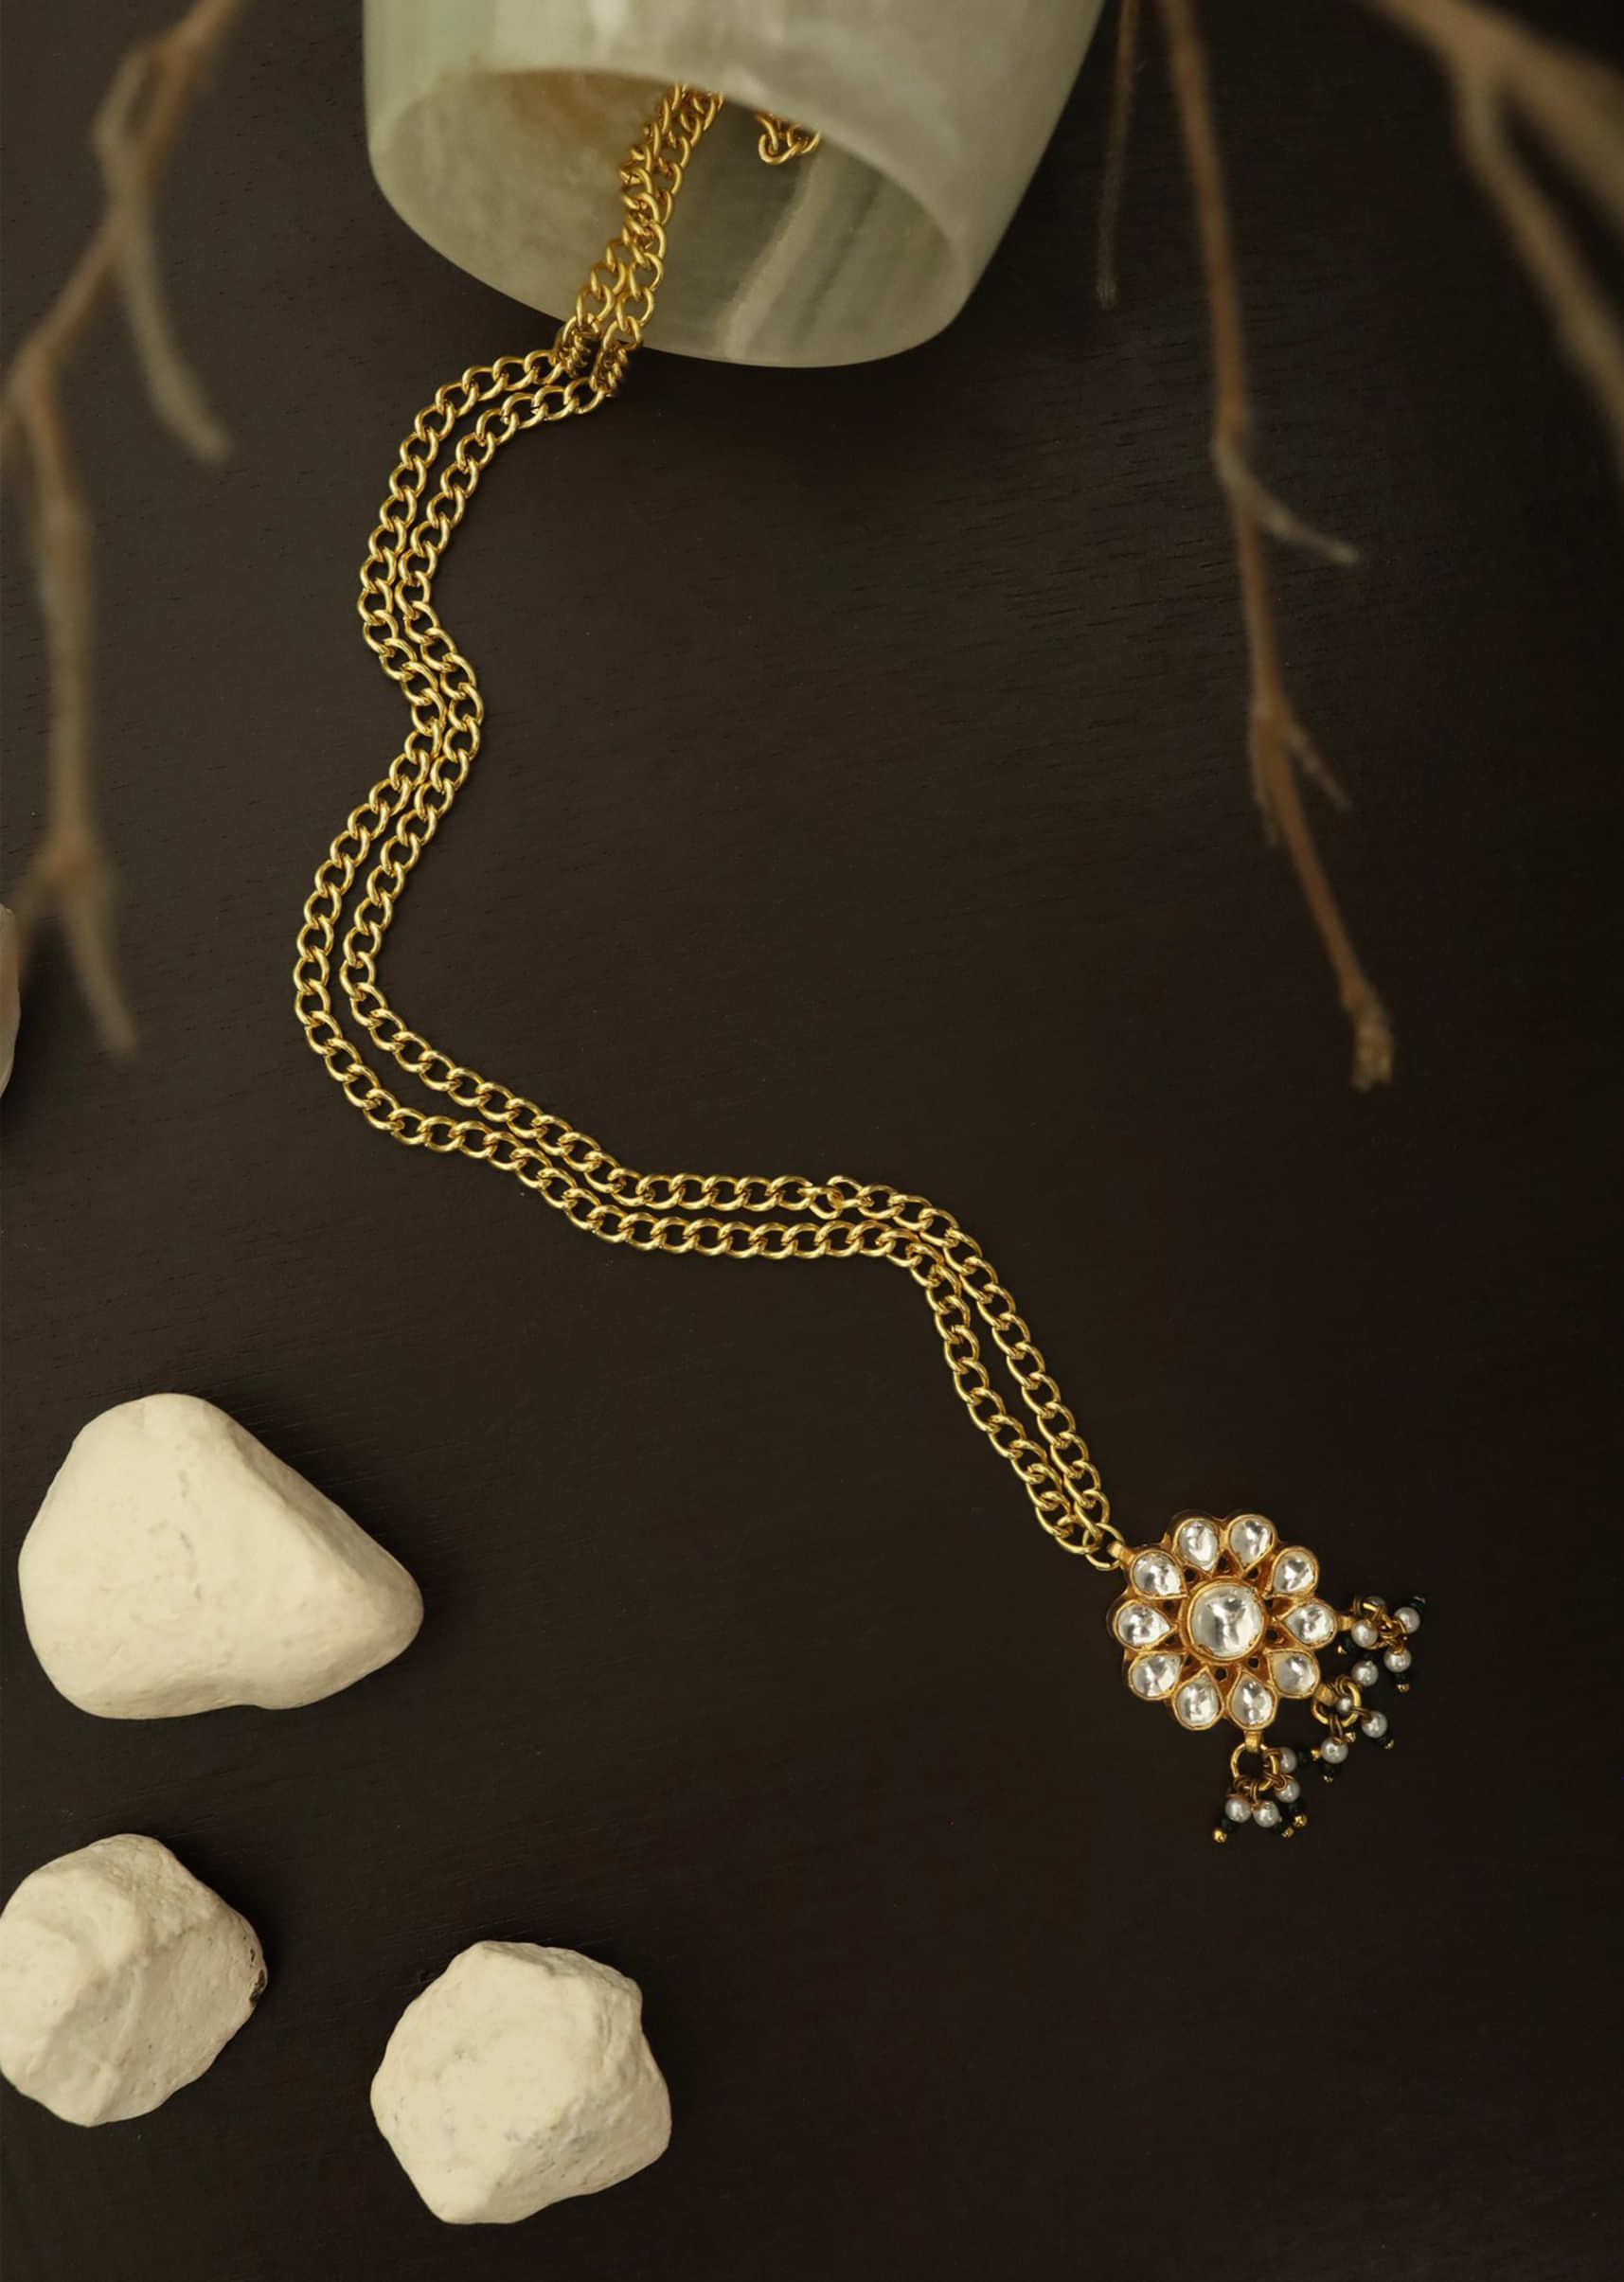 Gold Necklace With Floral Kundan Pendant Accented With Shell Pearls And Green Stones